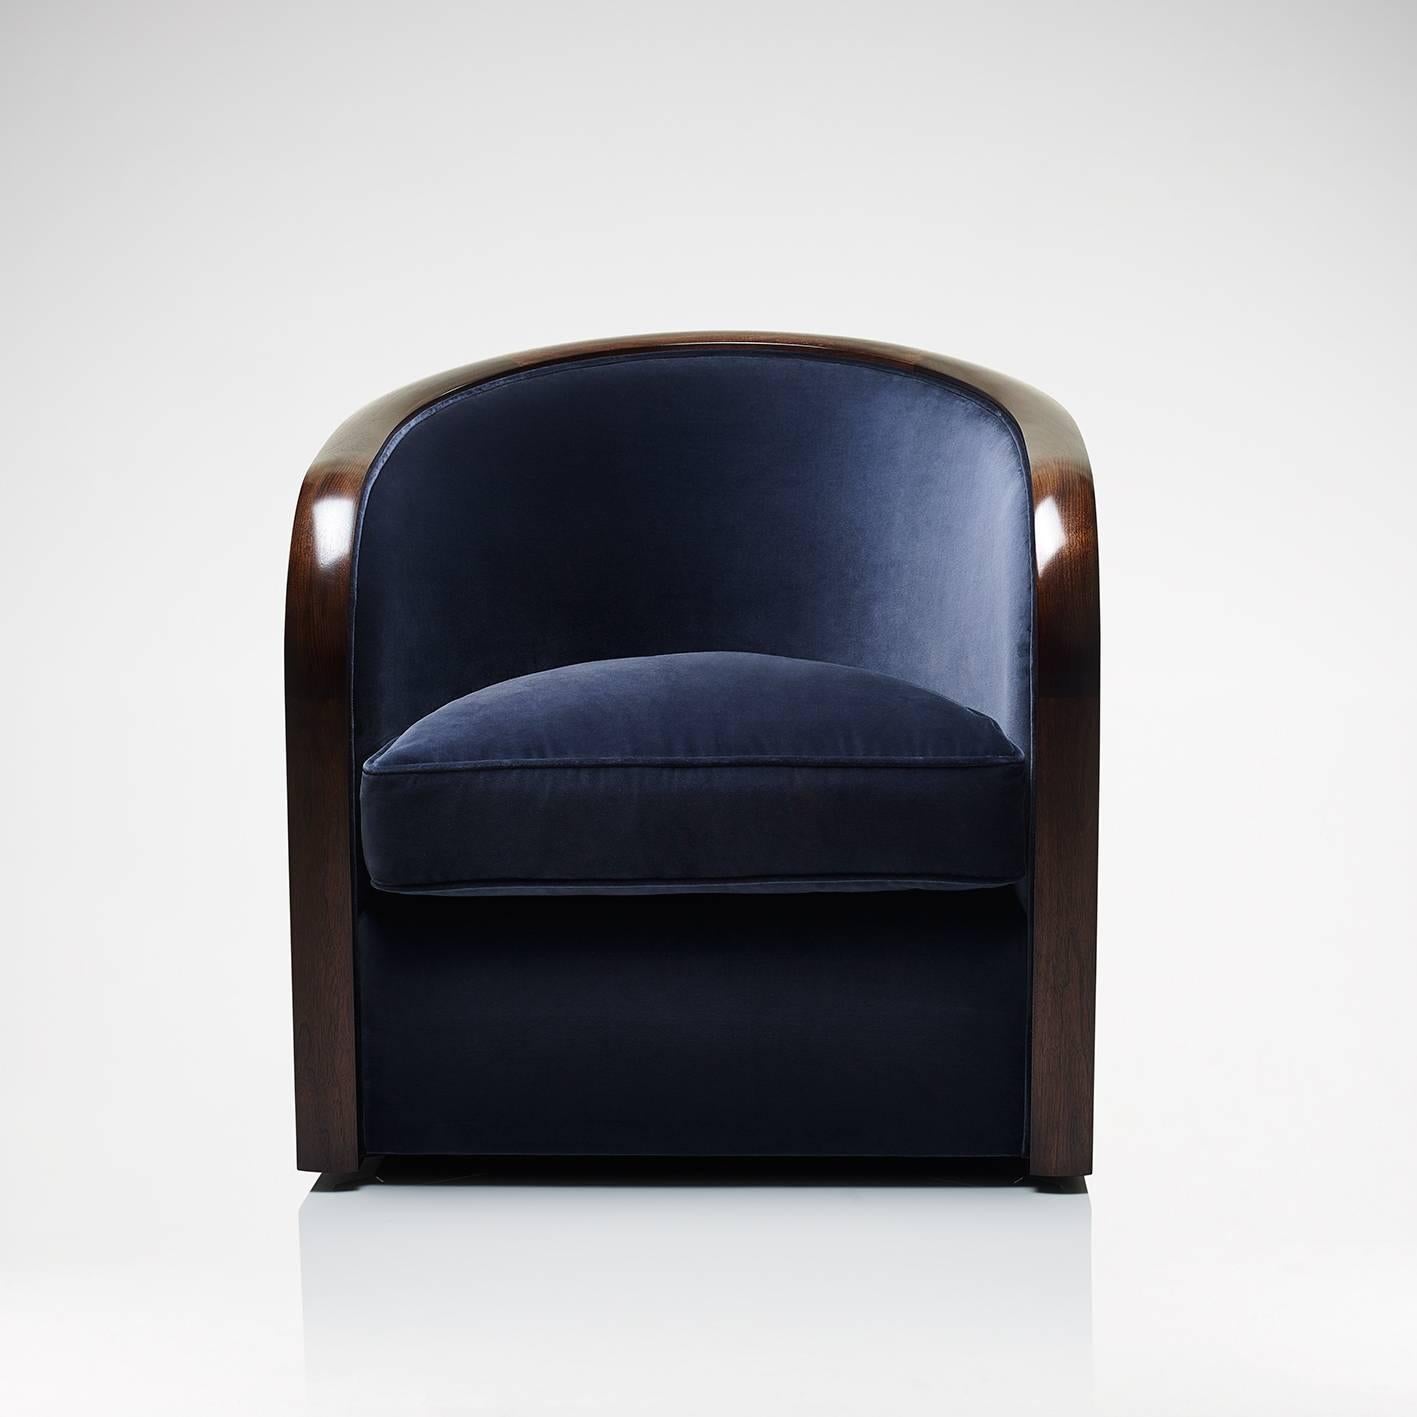 The Savoy rotating tub chair is handcrafted in our British workshops using traditional methods. Classically made, the chair has hand-tied springs with a sprung cane edge. The foam core is wrapped in duck feather and down to allow extra bounce and